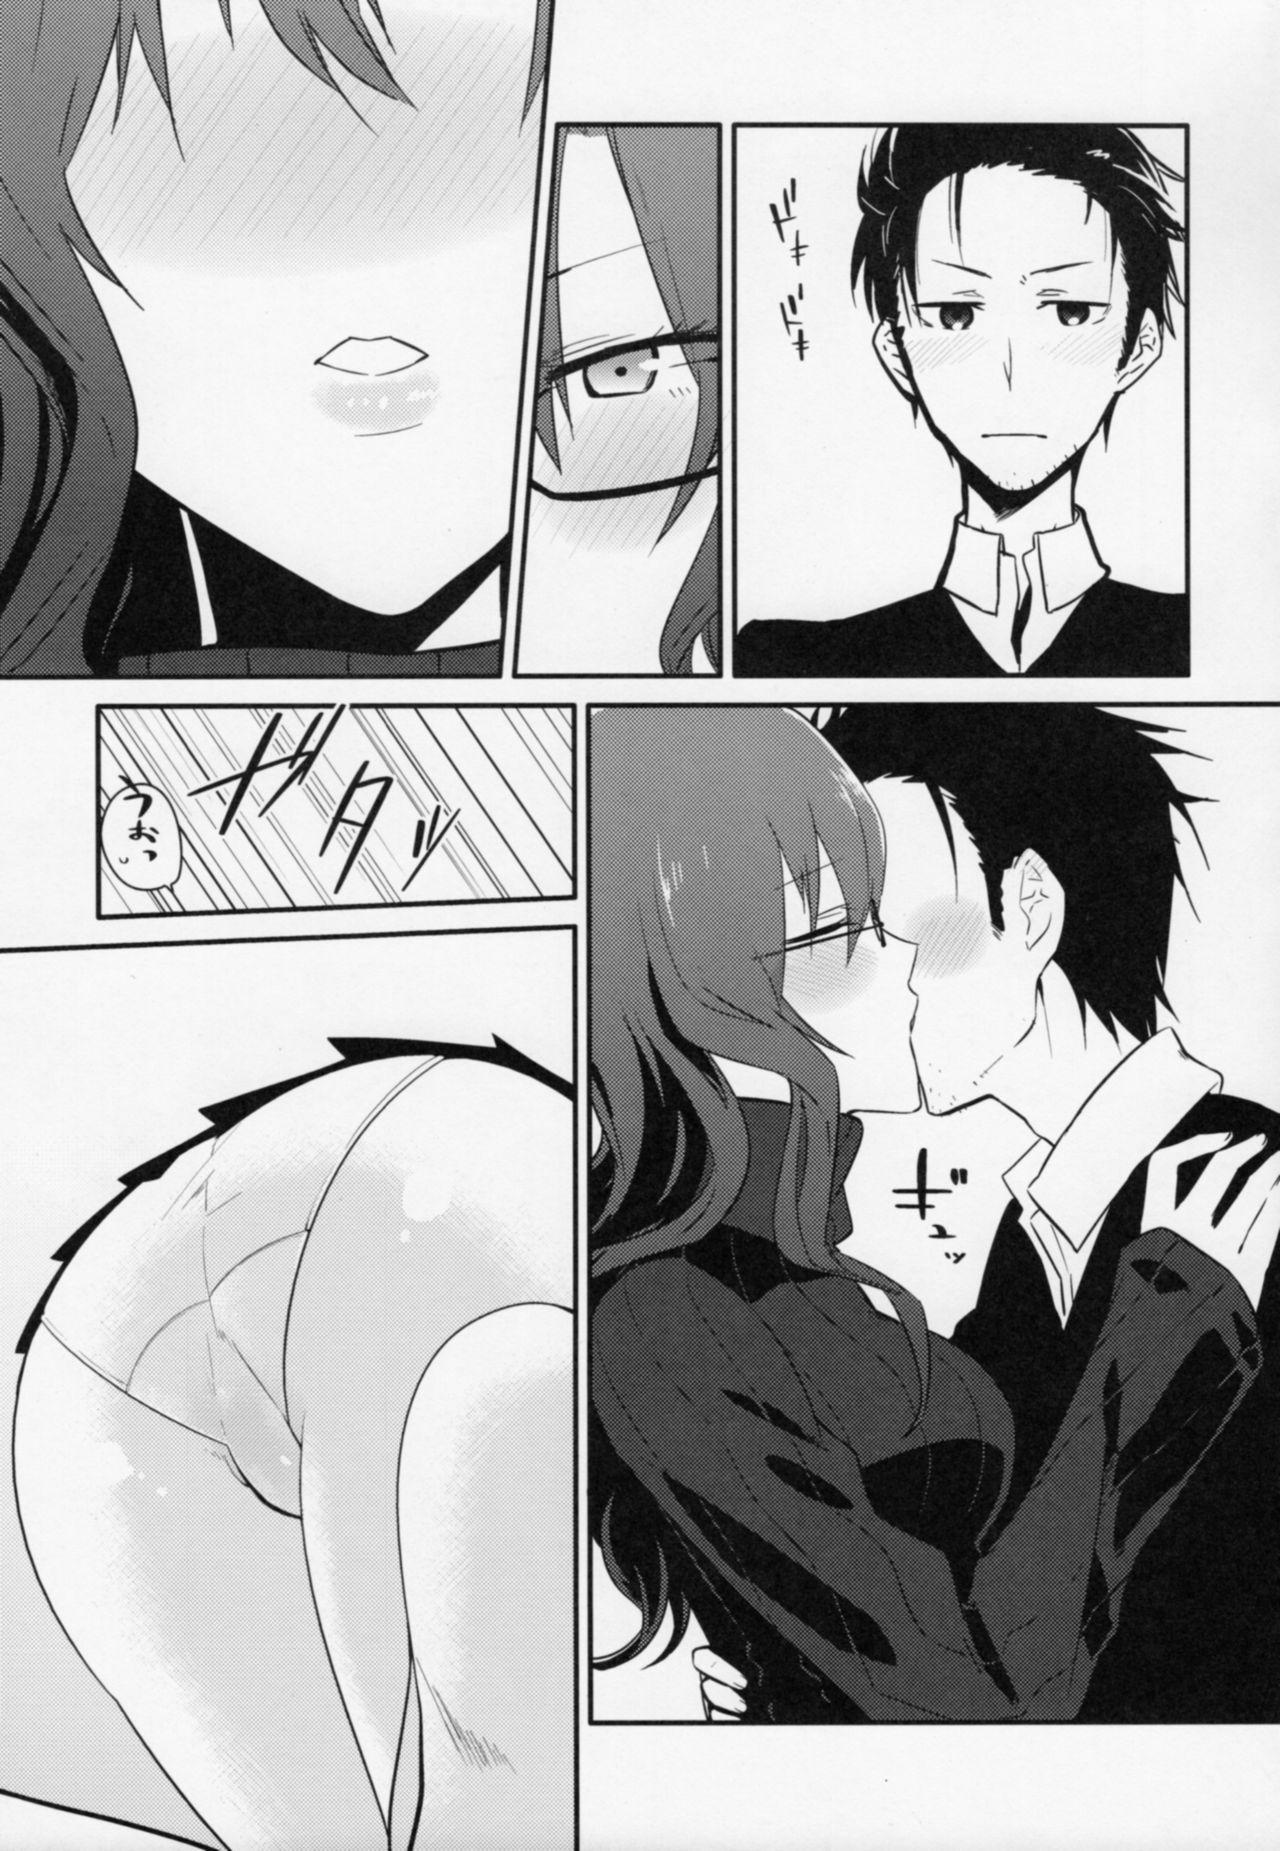 Nudity Communication Syndrome - Steinsgate Scene - Page 9